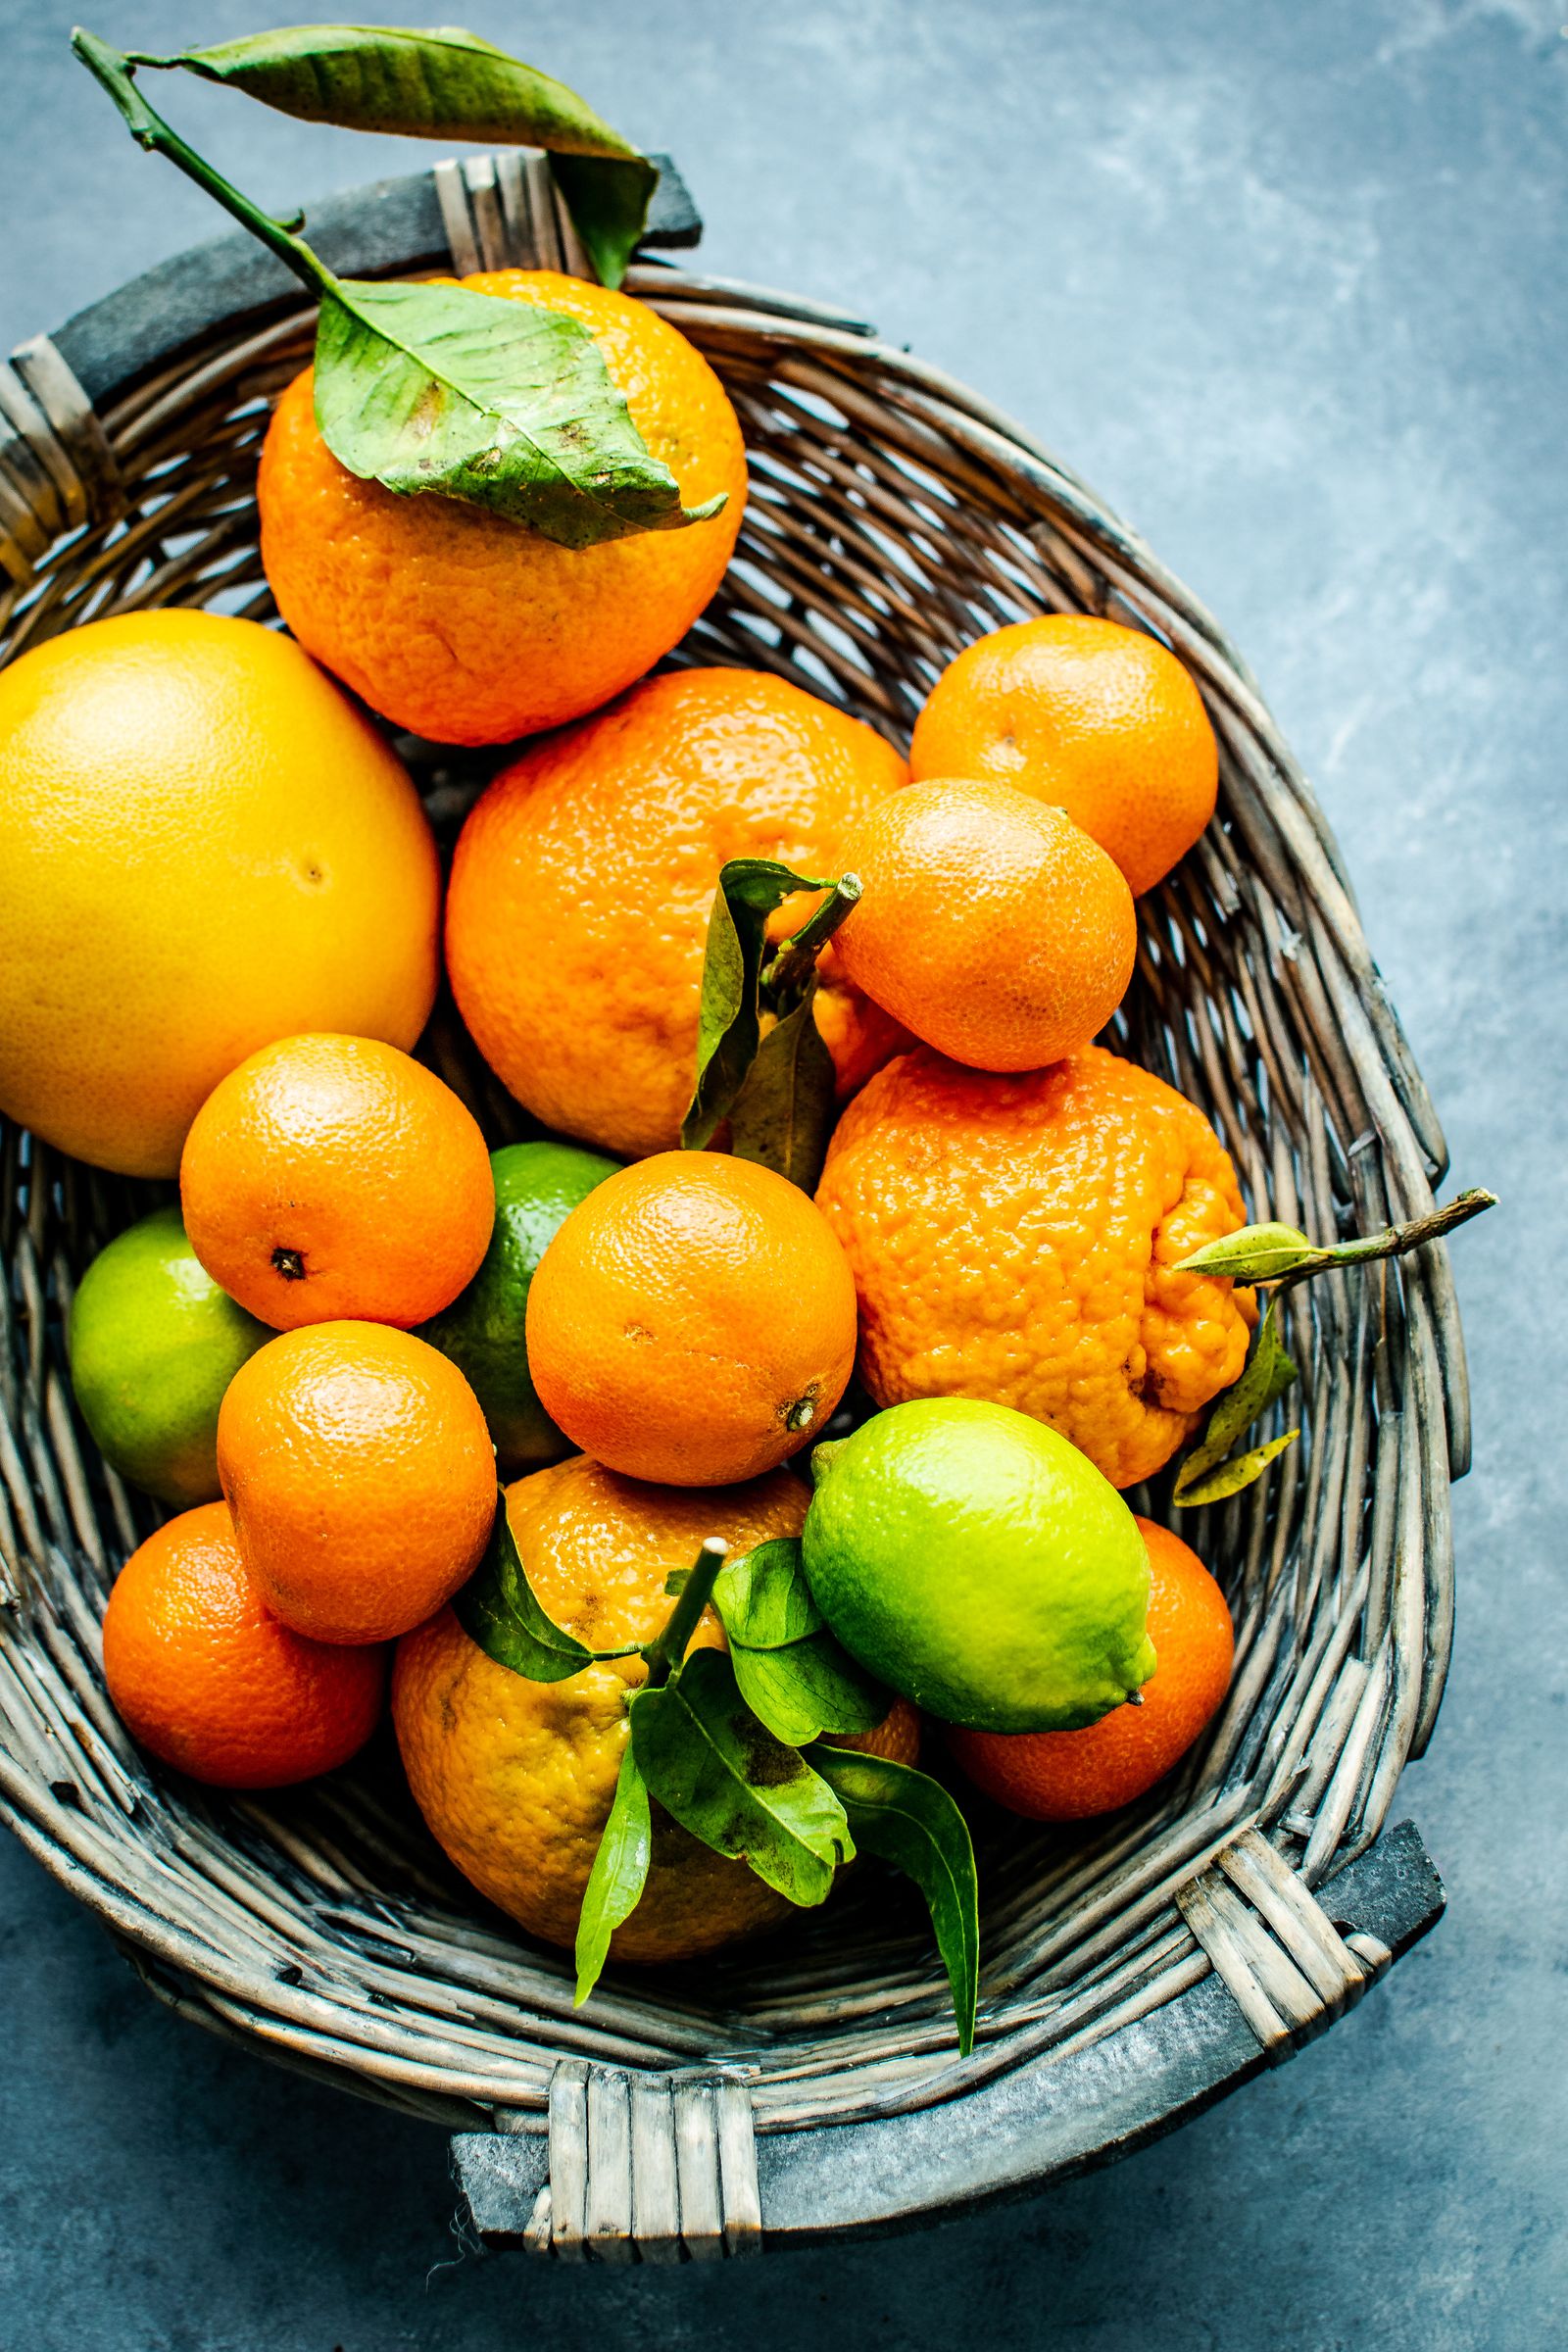 Why The Functional Doctor Says It's Best to Eat the Whole Organic Orange